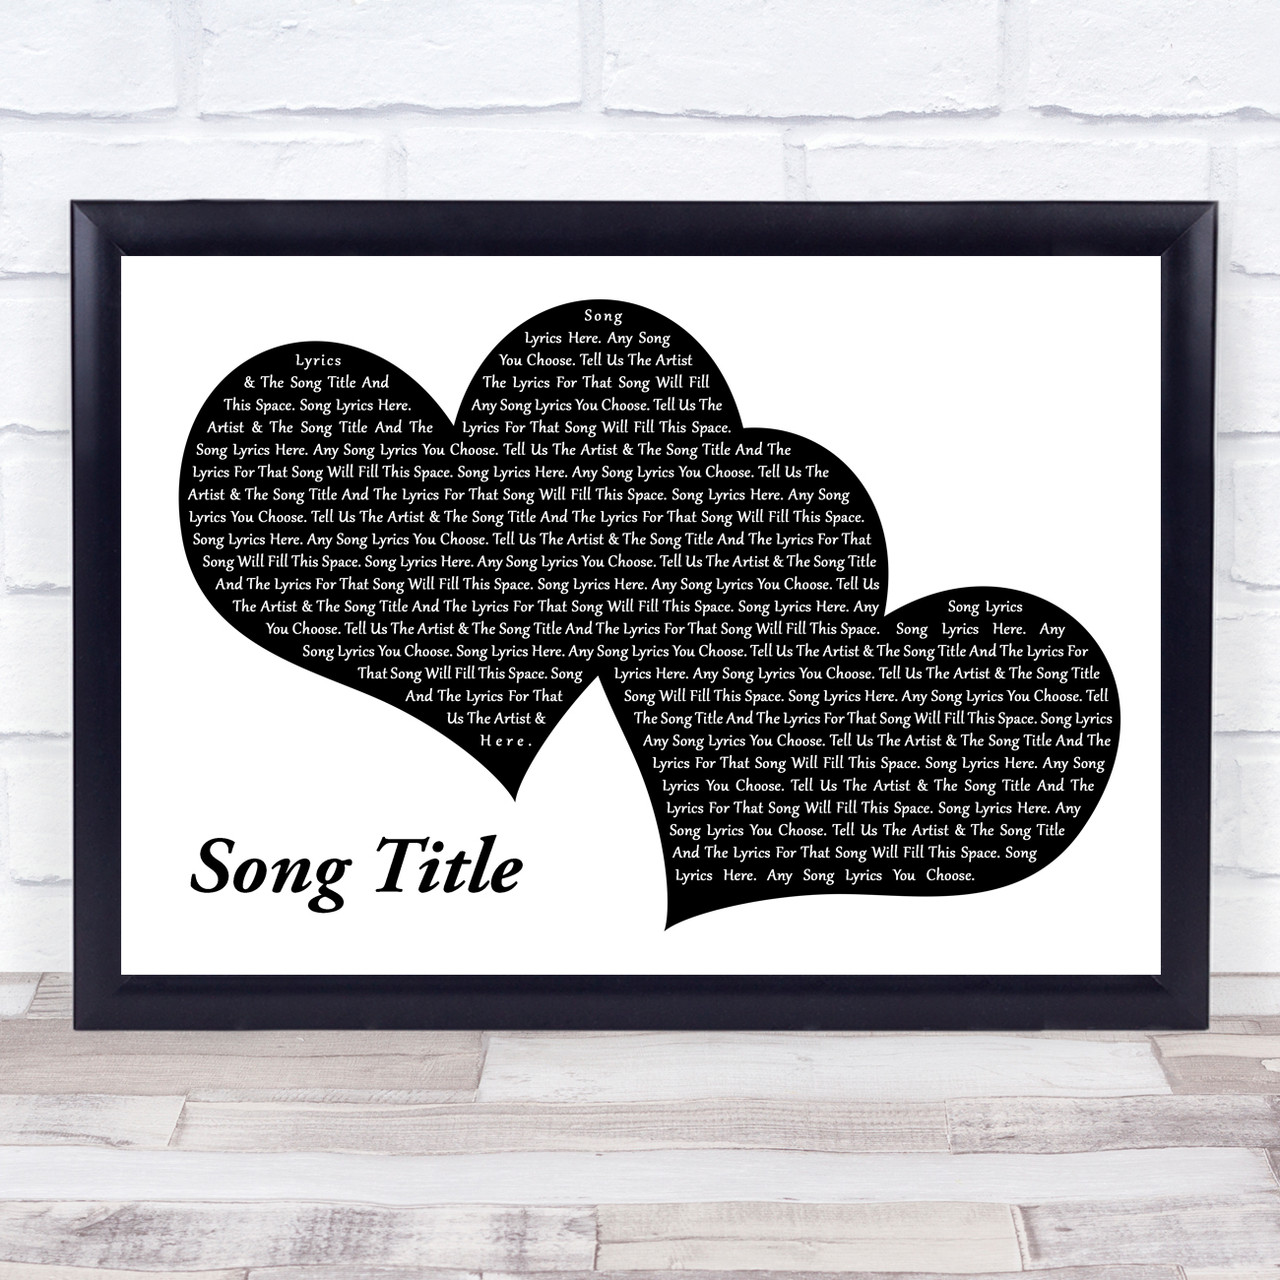  You're My One and Only (True Love) Black Heart Song Lyric Art  Music Quote Gift Poster Print : Home & Kitchen